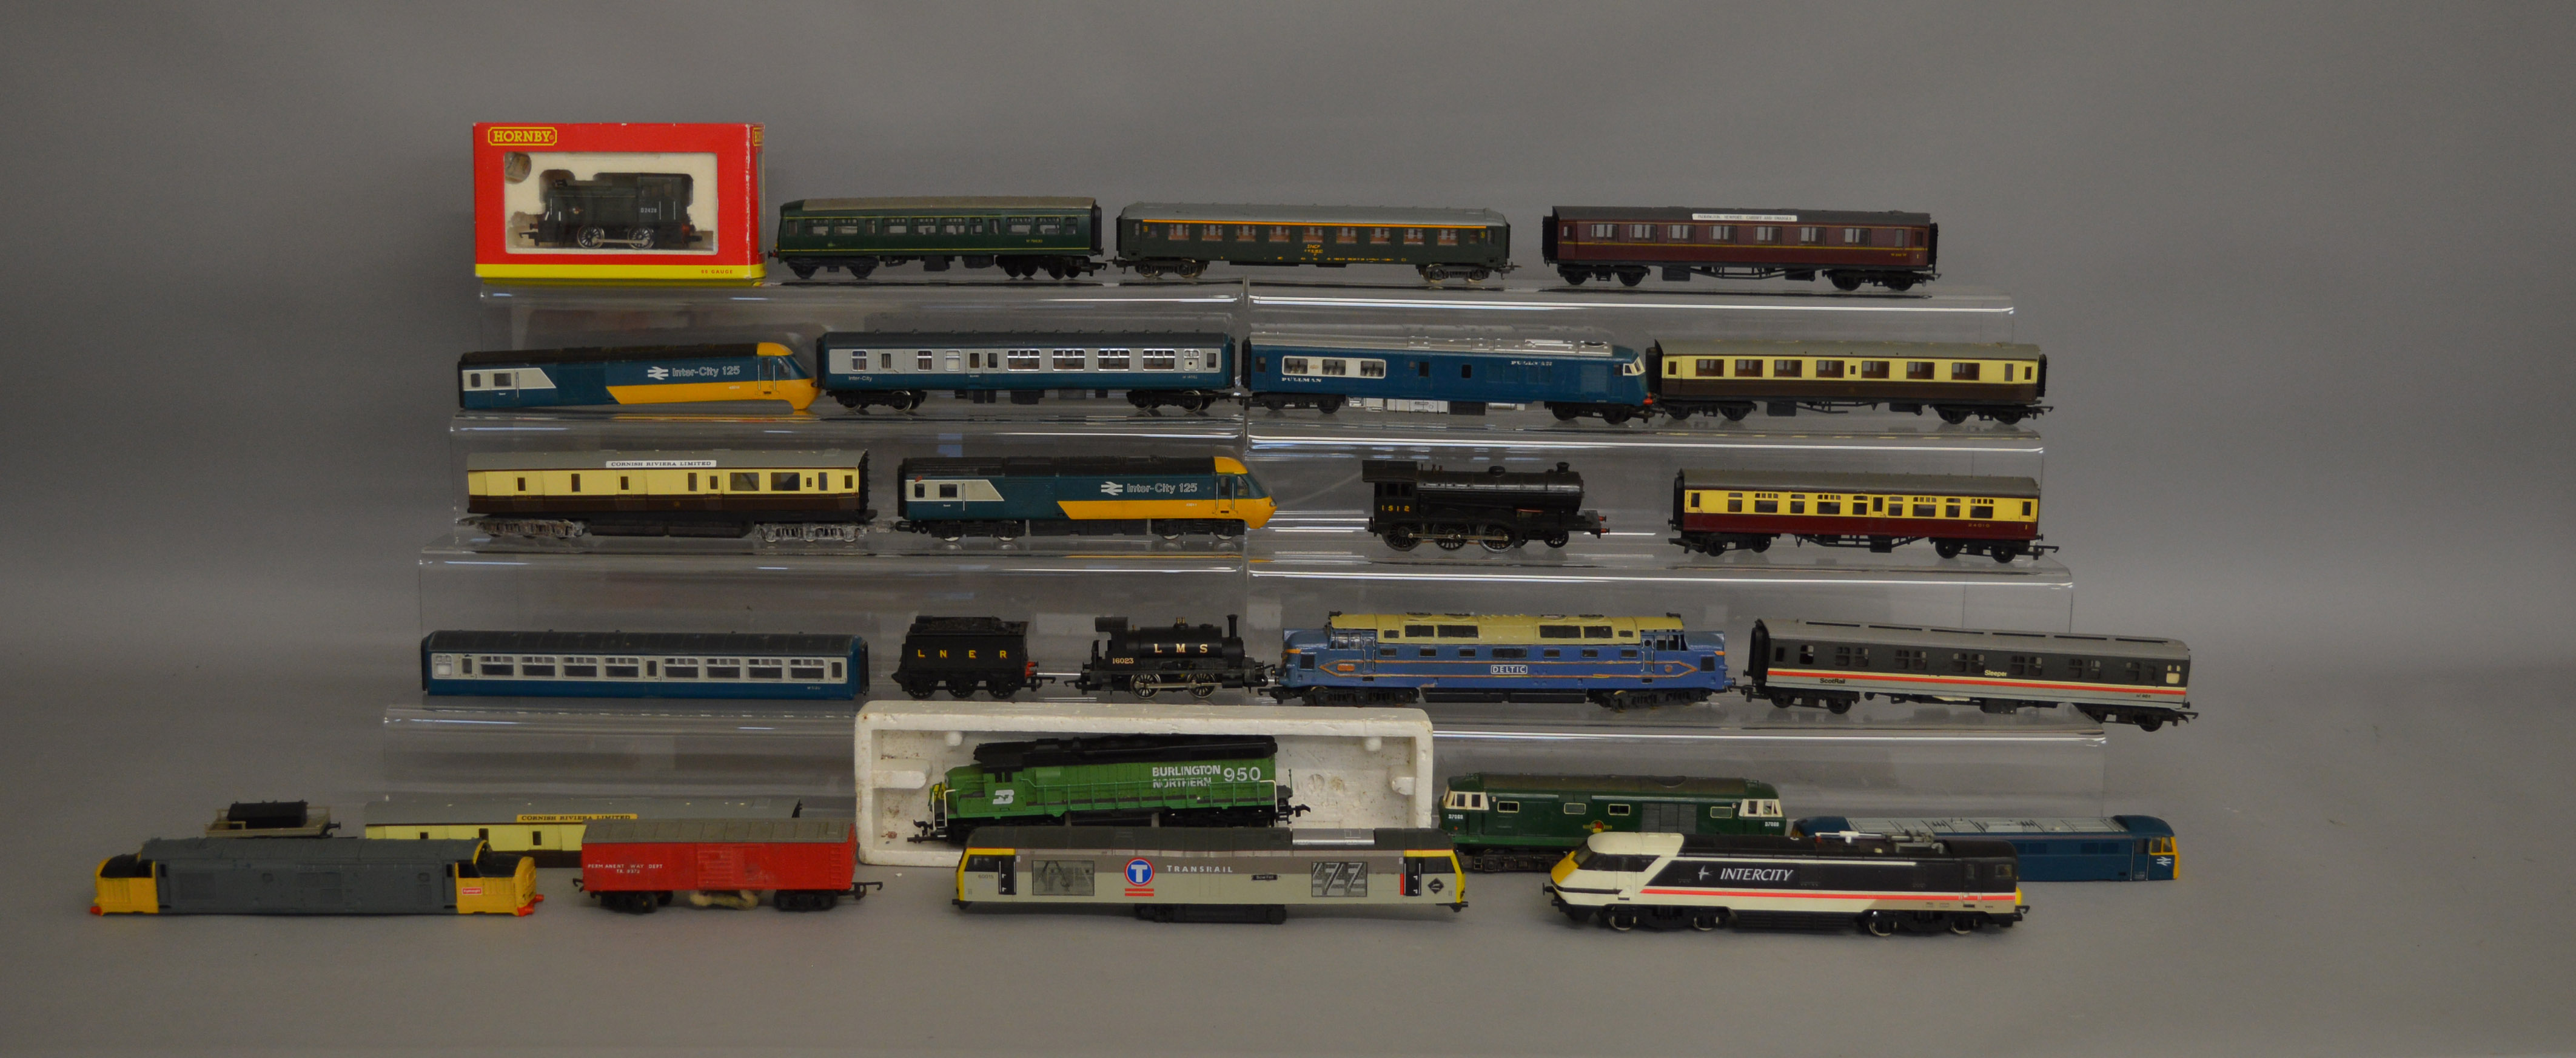 OO Gauge. Assorted Locomotive and Coach bodies and chassis by Hornby, Tri-ang, Lima etc. for